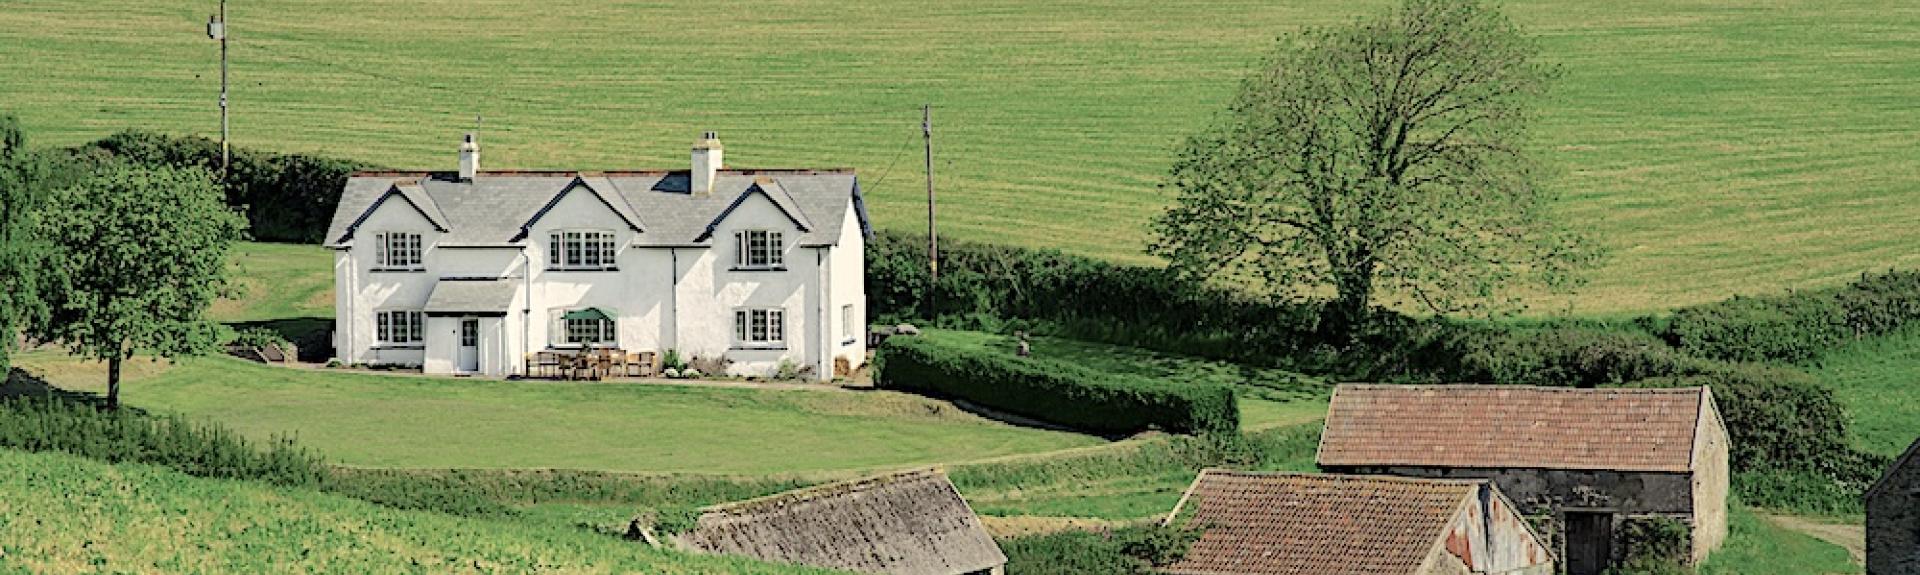 A large North Devon farmhouse with a cluster of three barns, all surrounded by green fields.